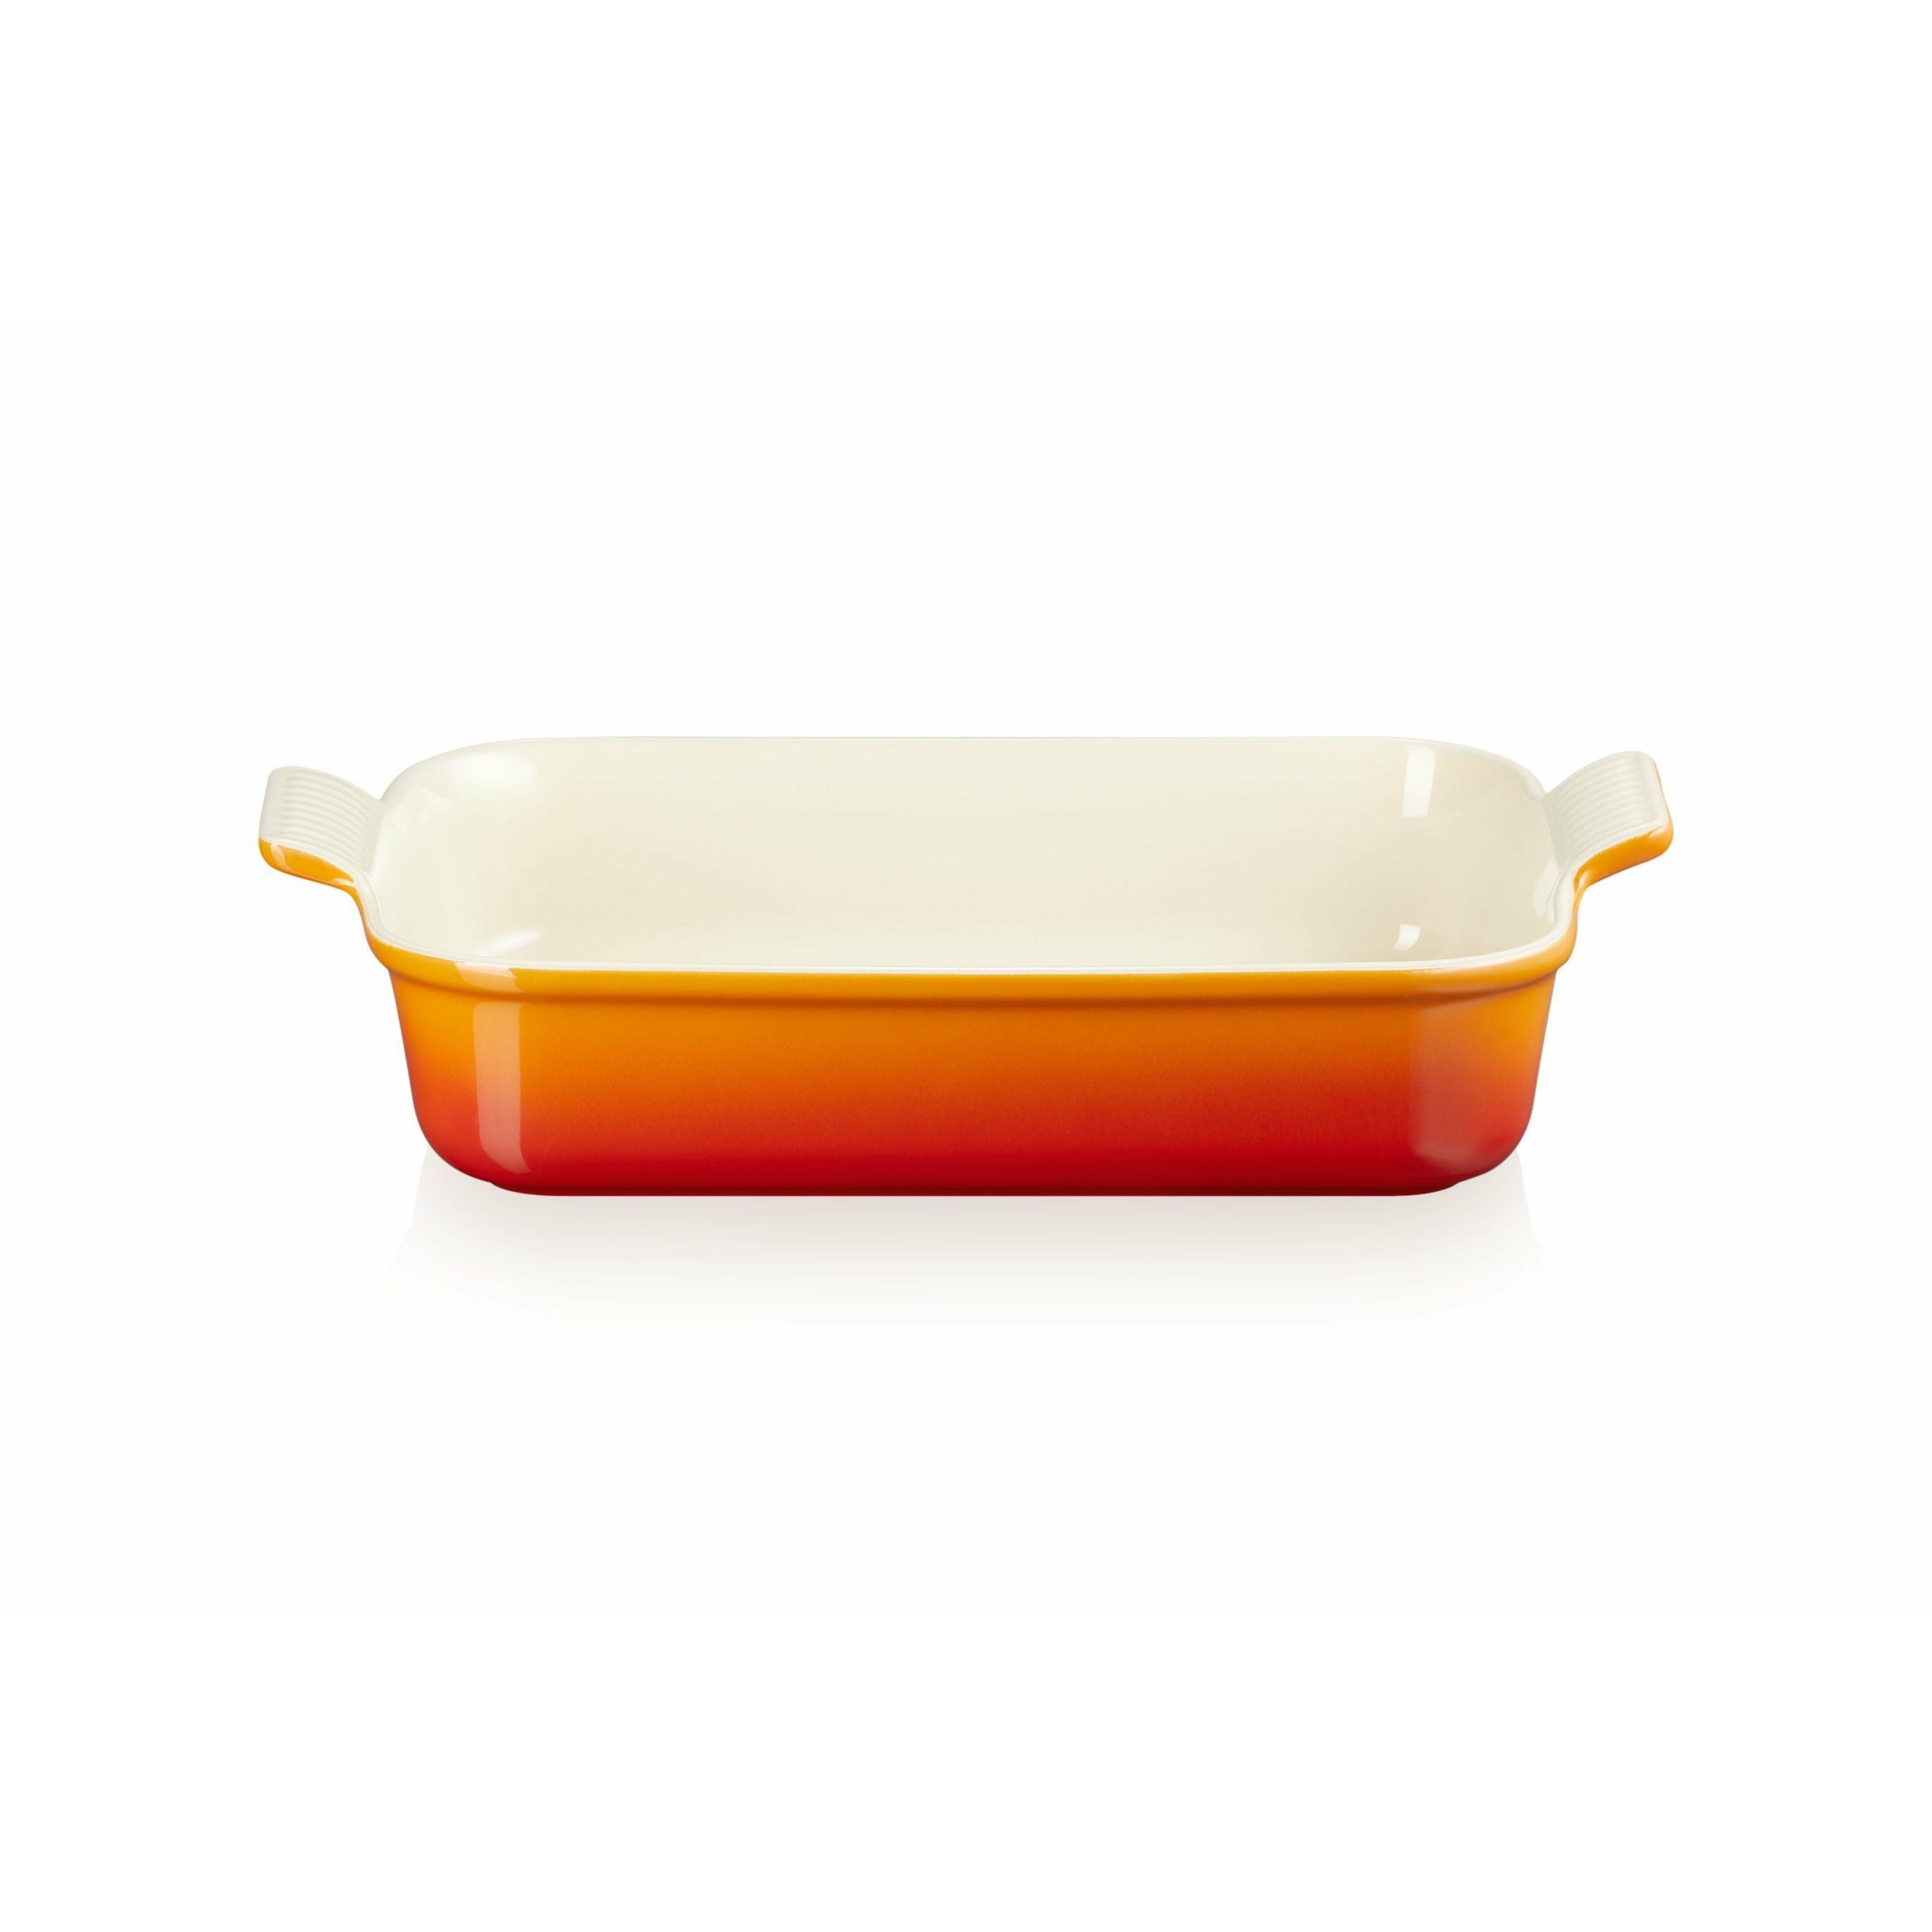 Le Creuset Rectangular Baking Dish Tradition 32 Cm, Oven Red